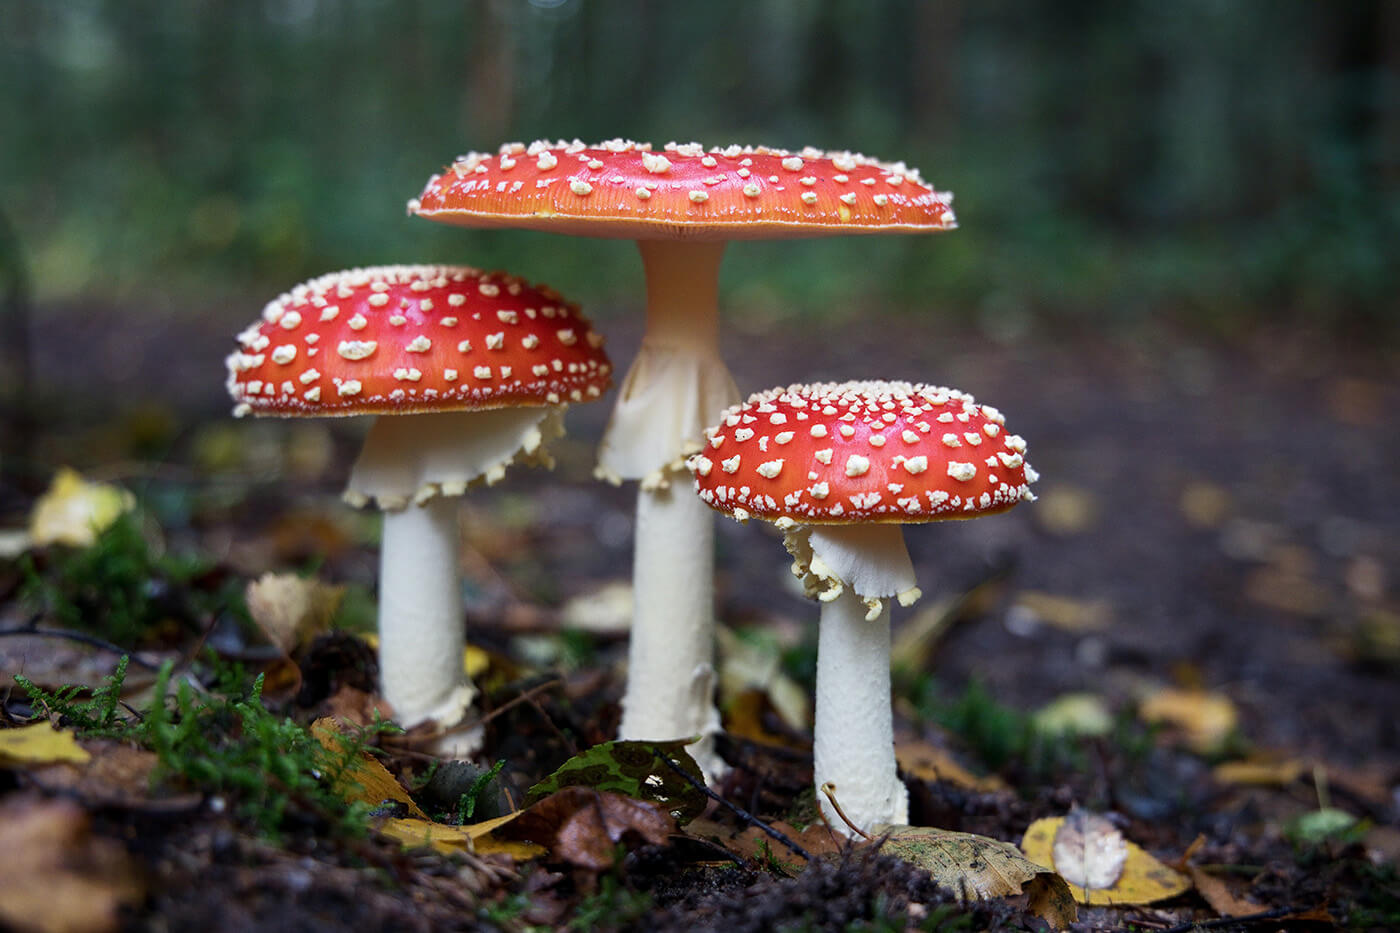 Photograph of three red and white toadstool mushrooms growing out of the forest floor